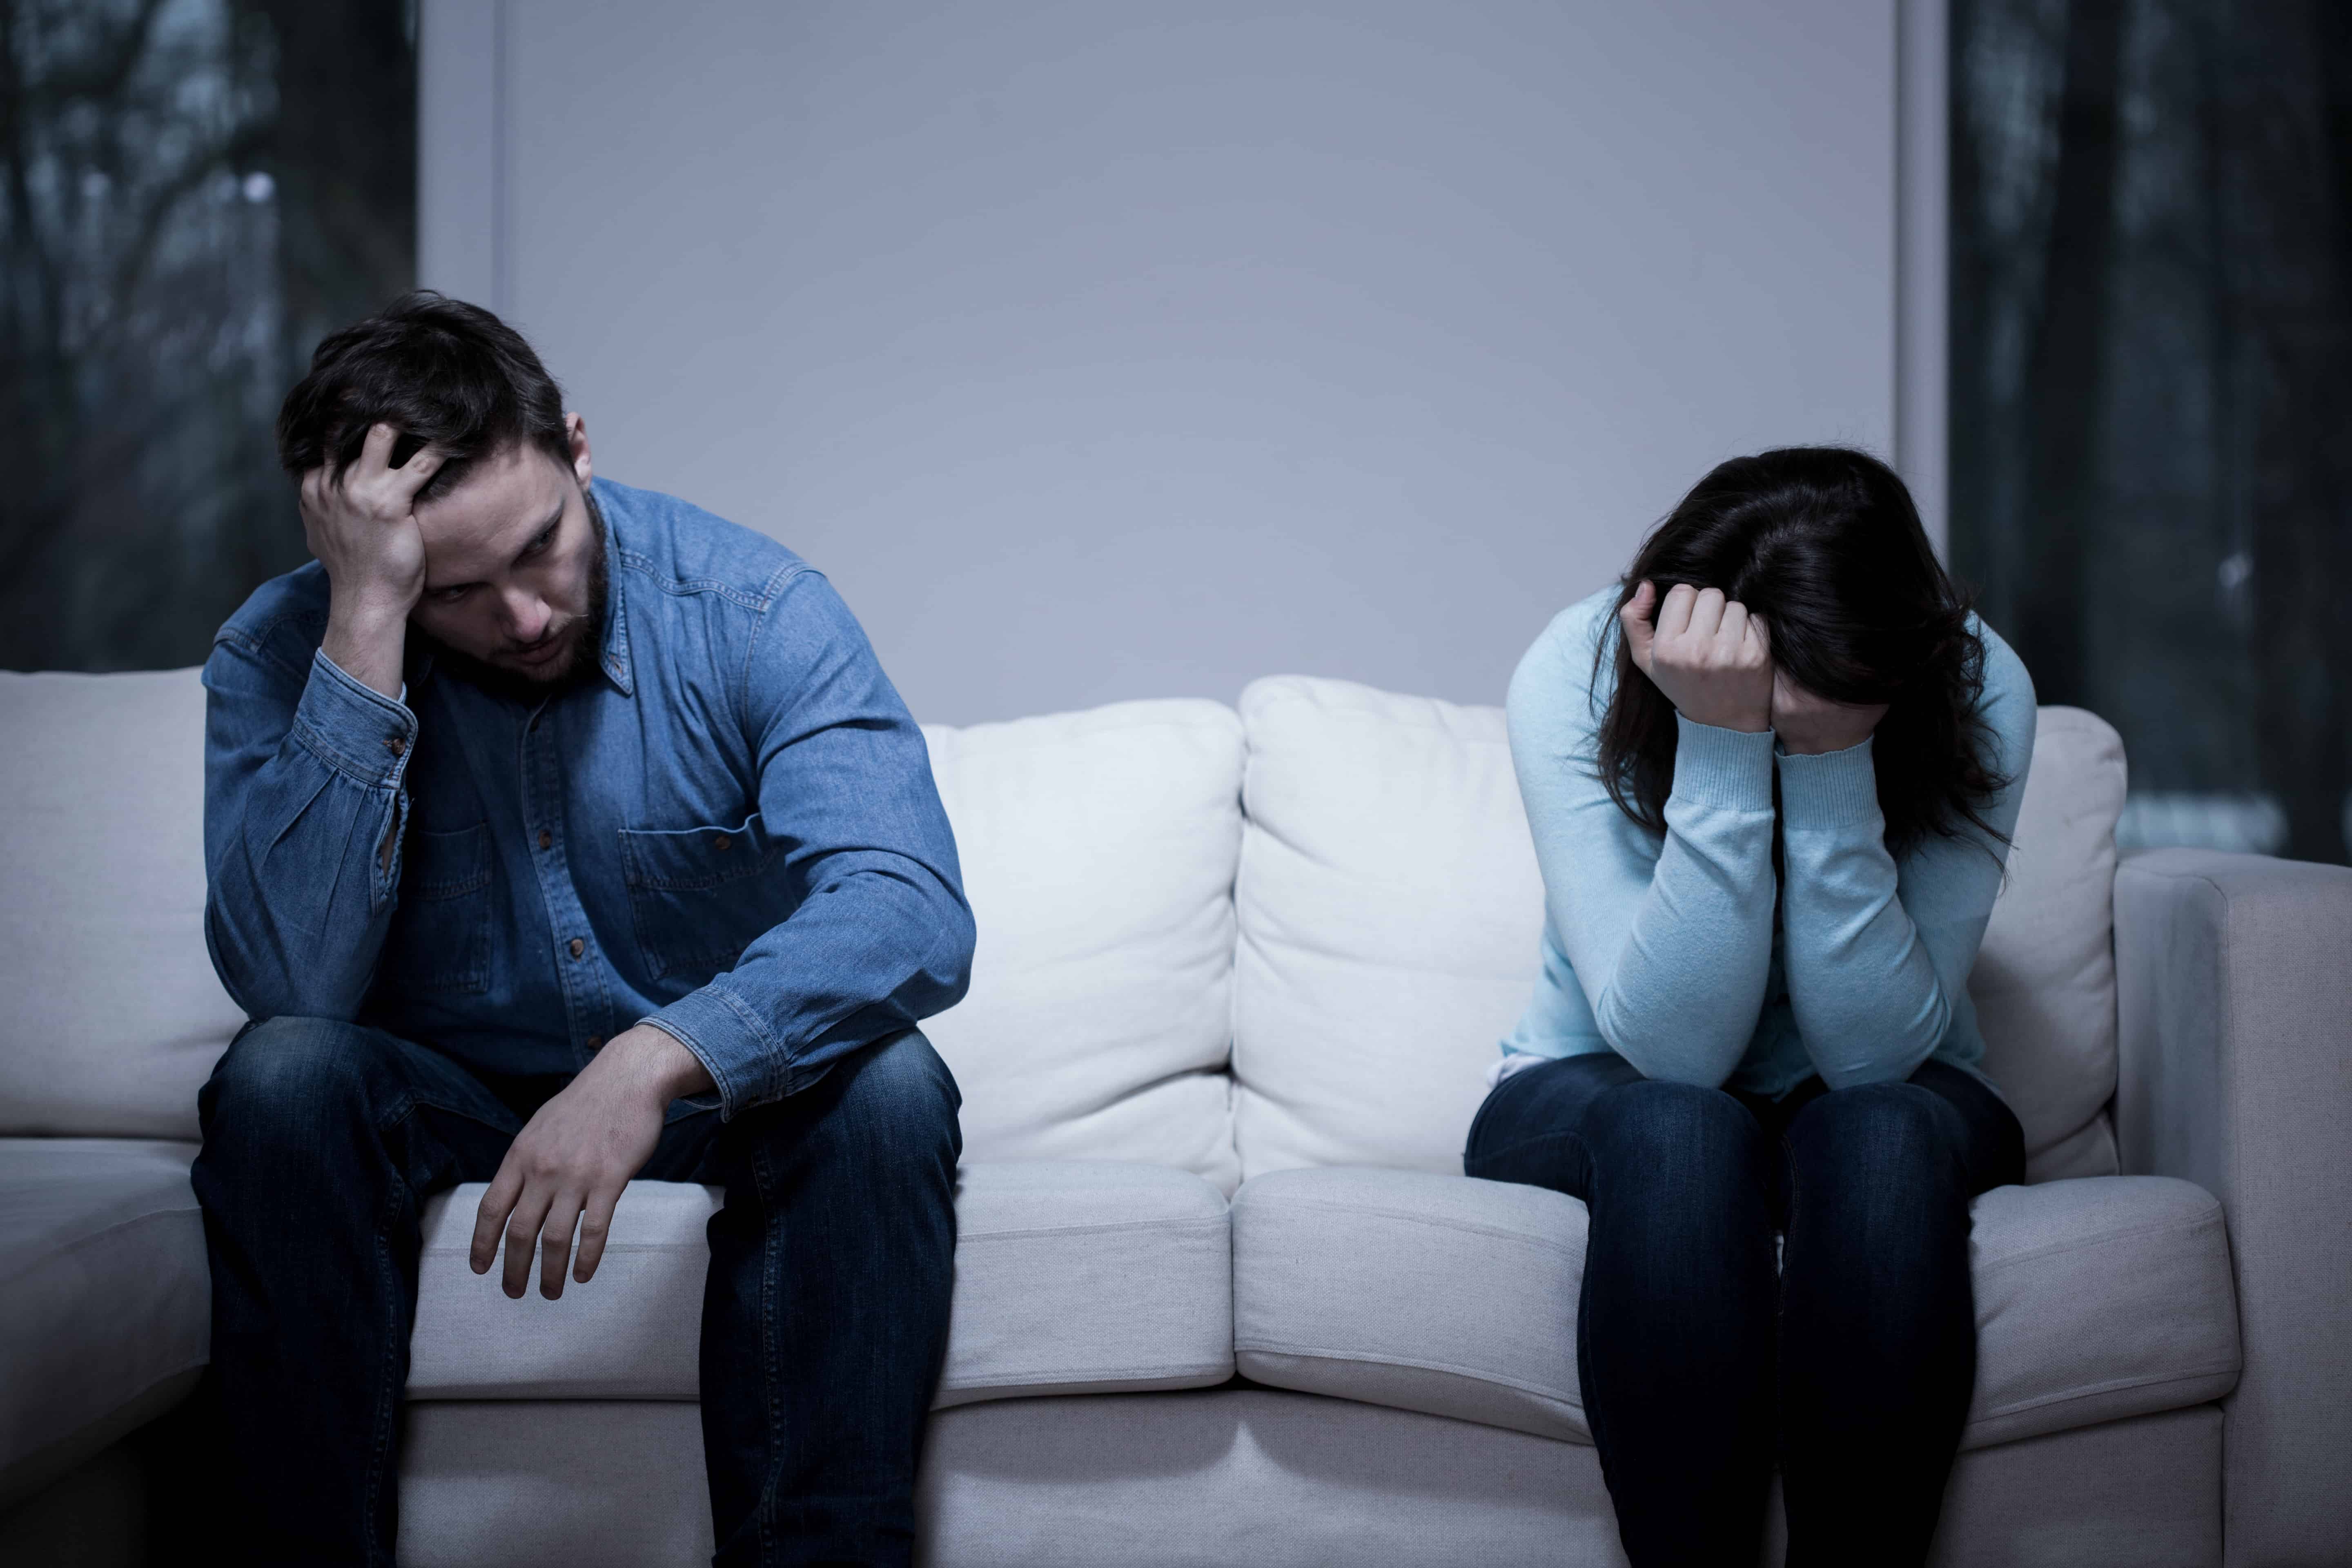 verbal abuse patterns partners should watch out for